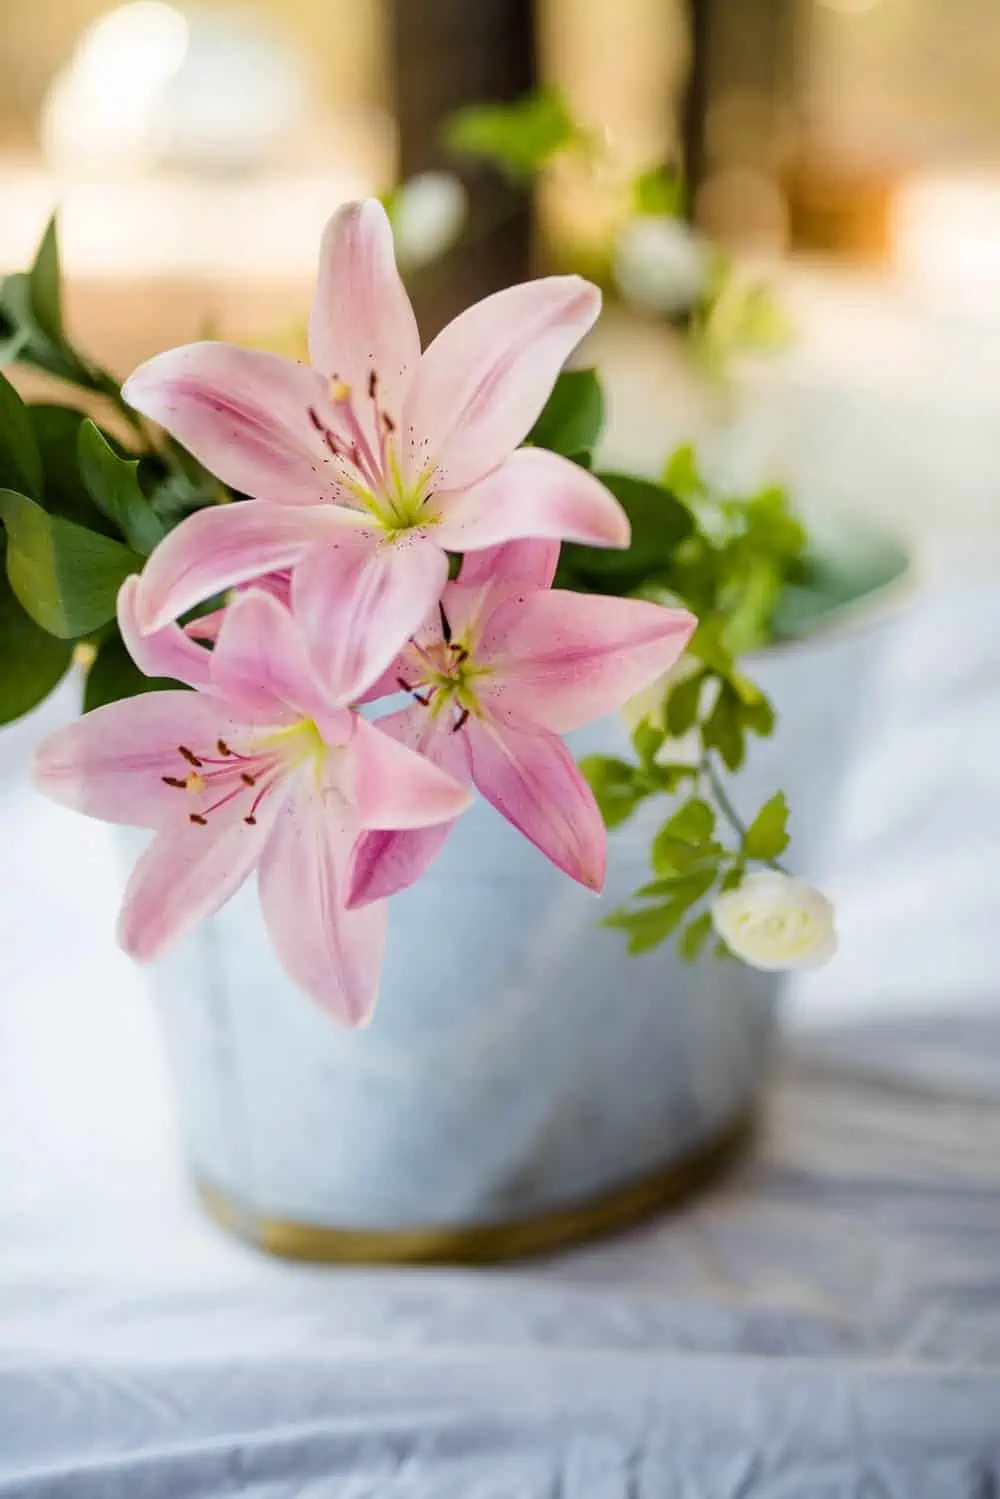 Lily flowers: Ultimate guide to grow & style various types (Buy now!)